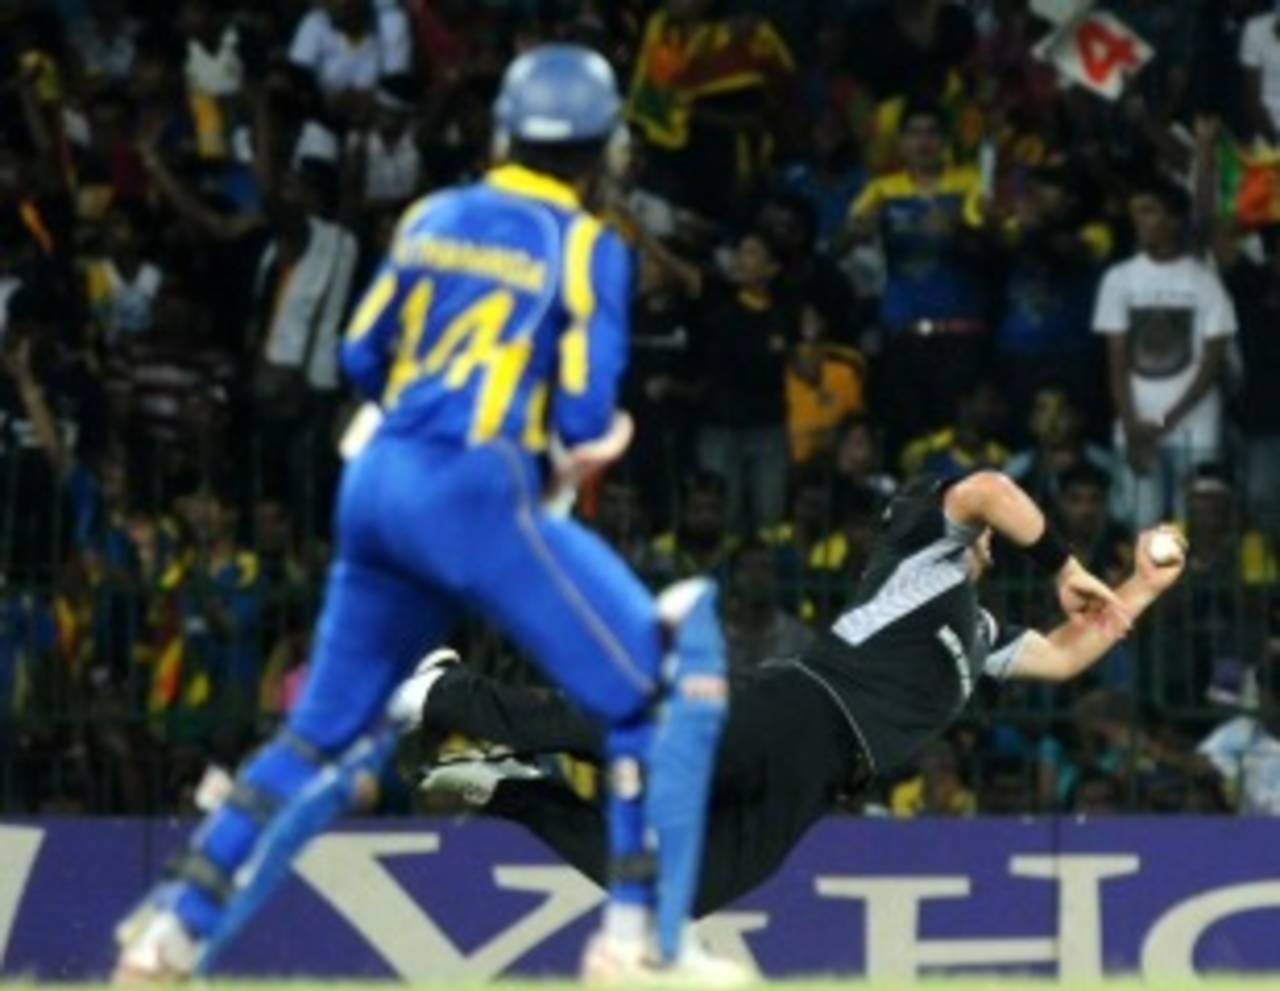 It wasn't as dramatic as his catch to dismiss Upul Tharanga but Jesse Ryder, yet again, dazzled on the field&nbsp;&nbsp;&bull;&nbsp;&nbsp;AFP